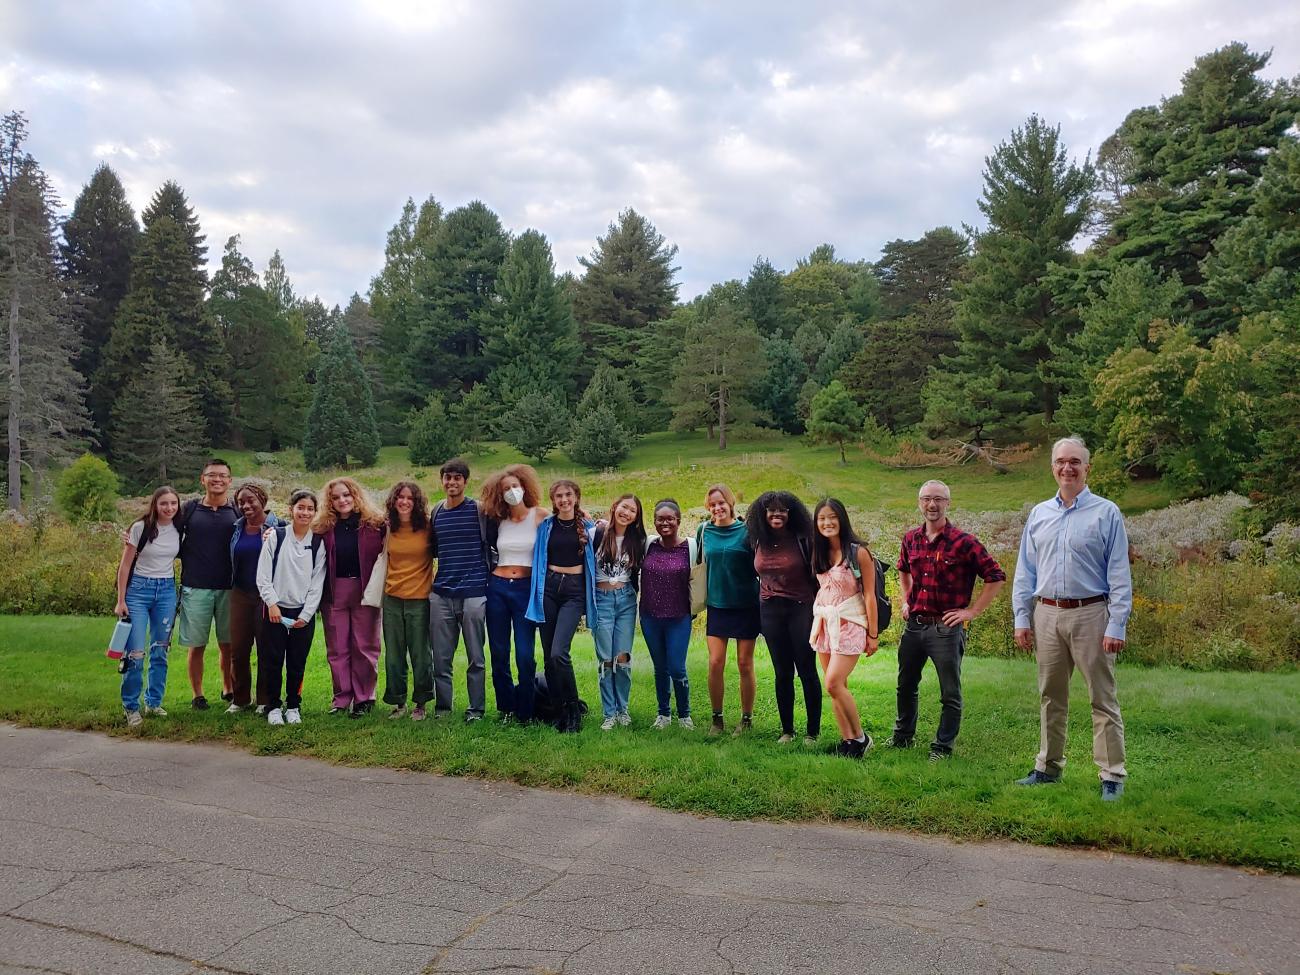 Group picture of students and professors standing beside a road and smiling at the camera.